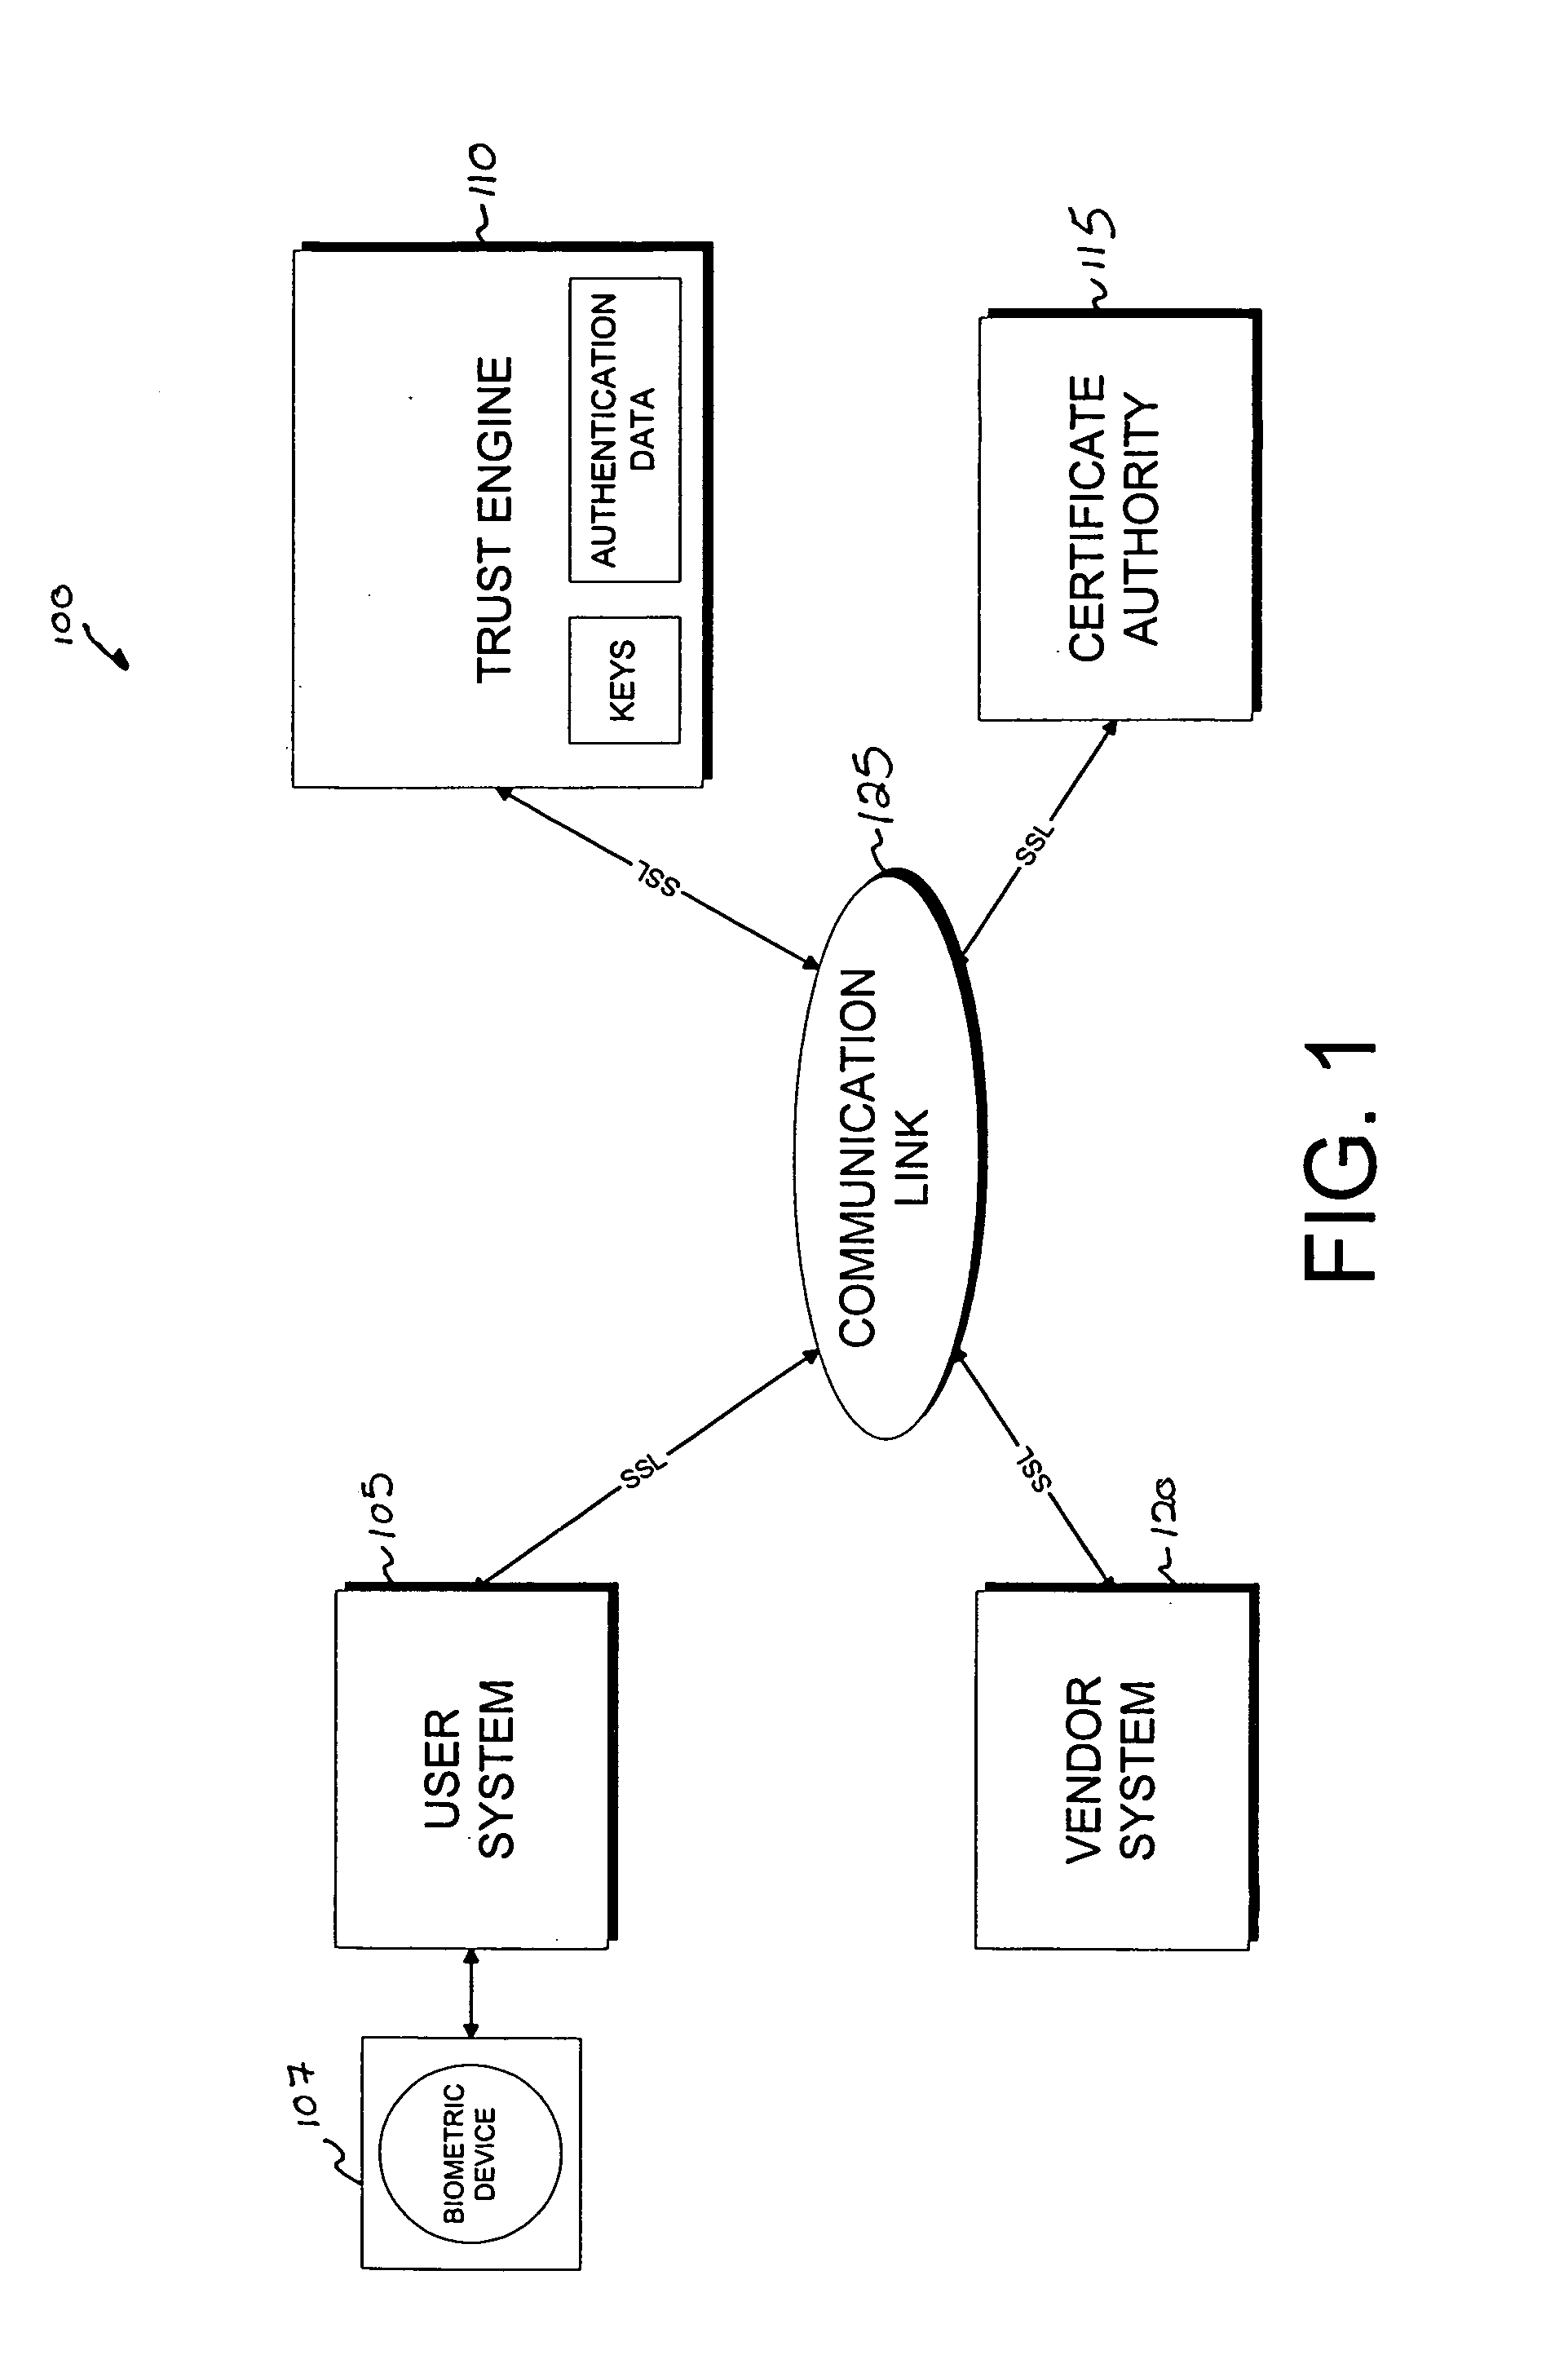 Context sensitive dynamic authentication in a cryptographic system